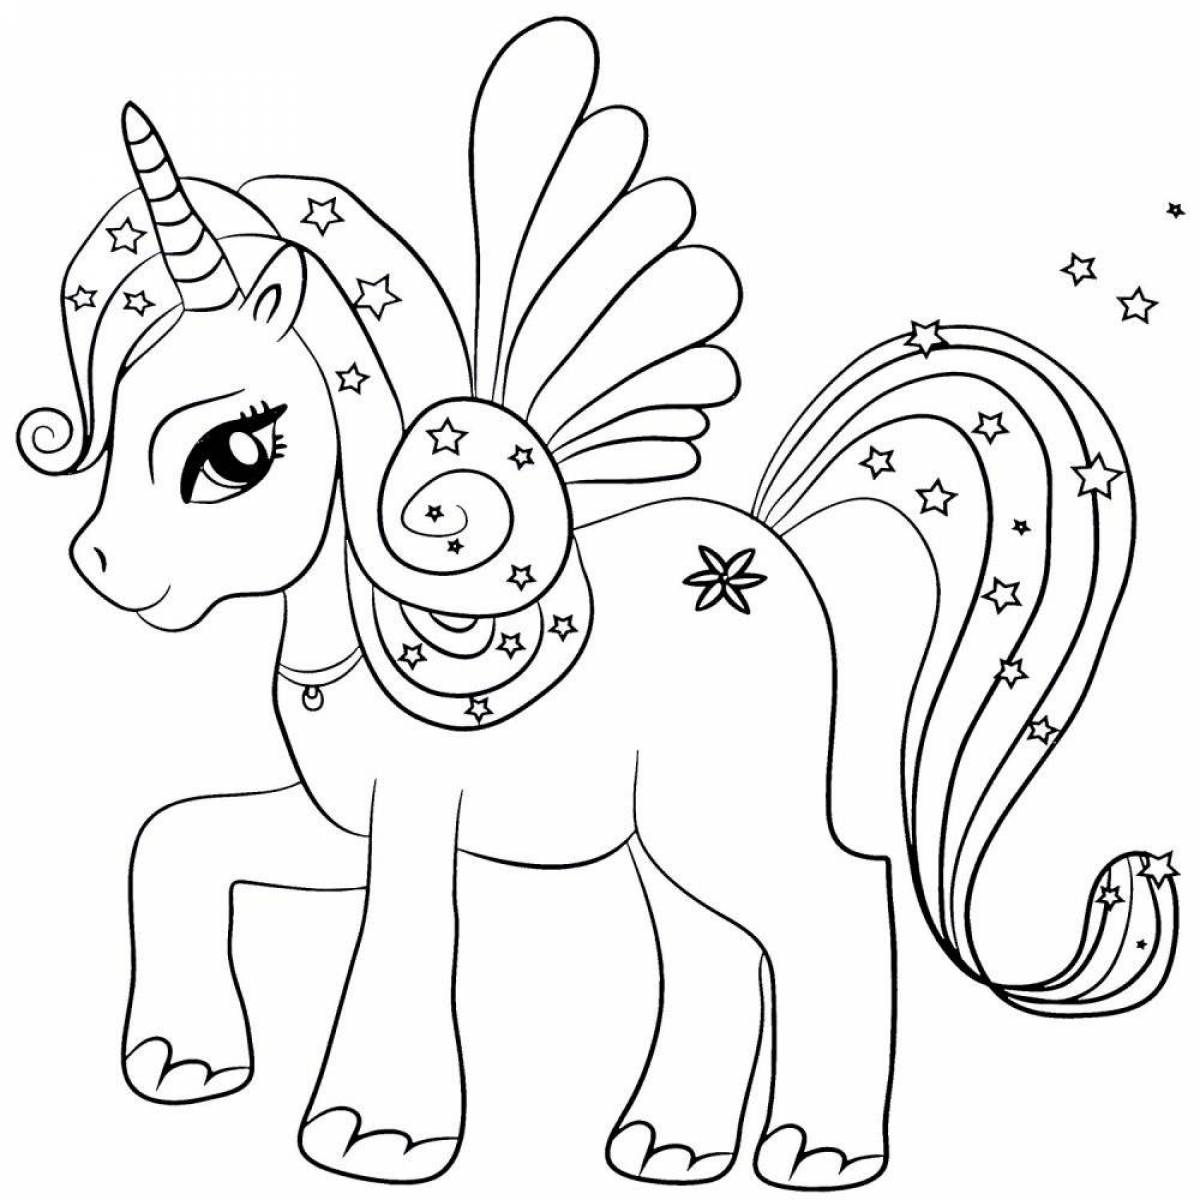 Shiny unicorn coloring book for kids